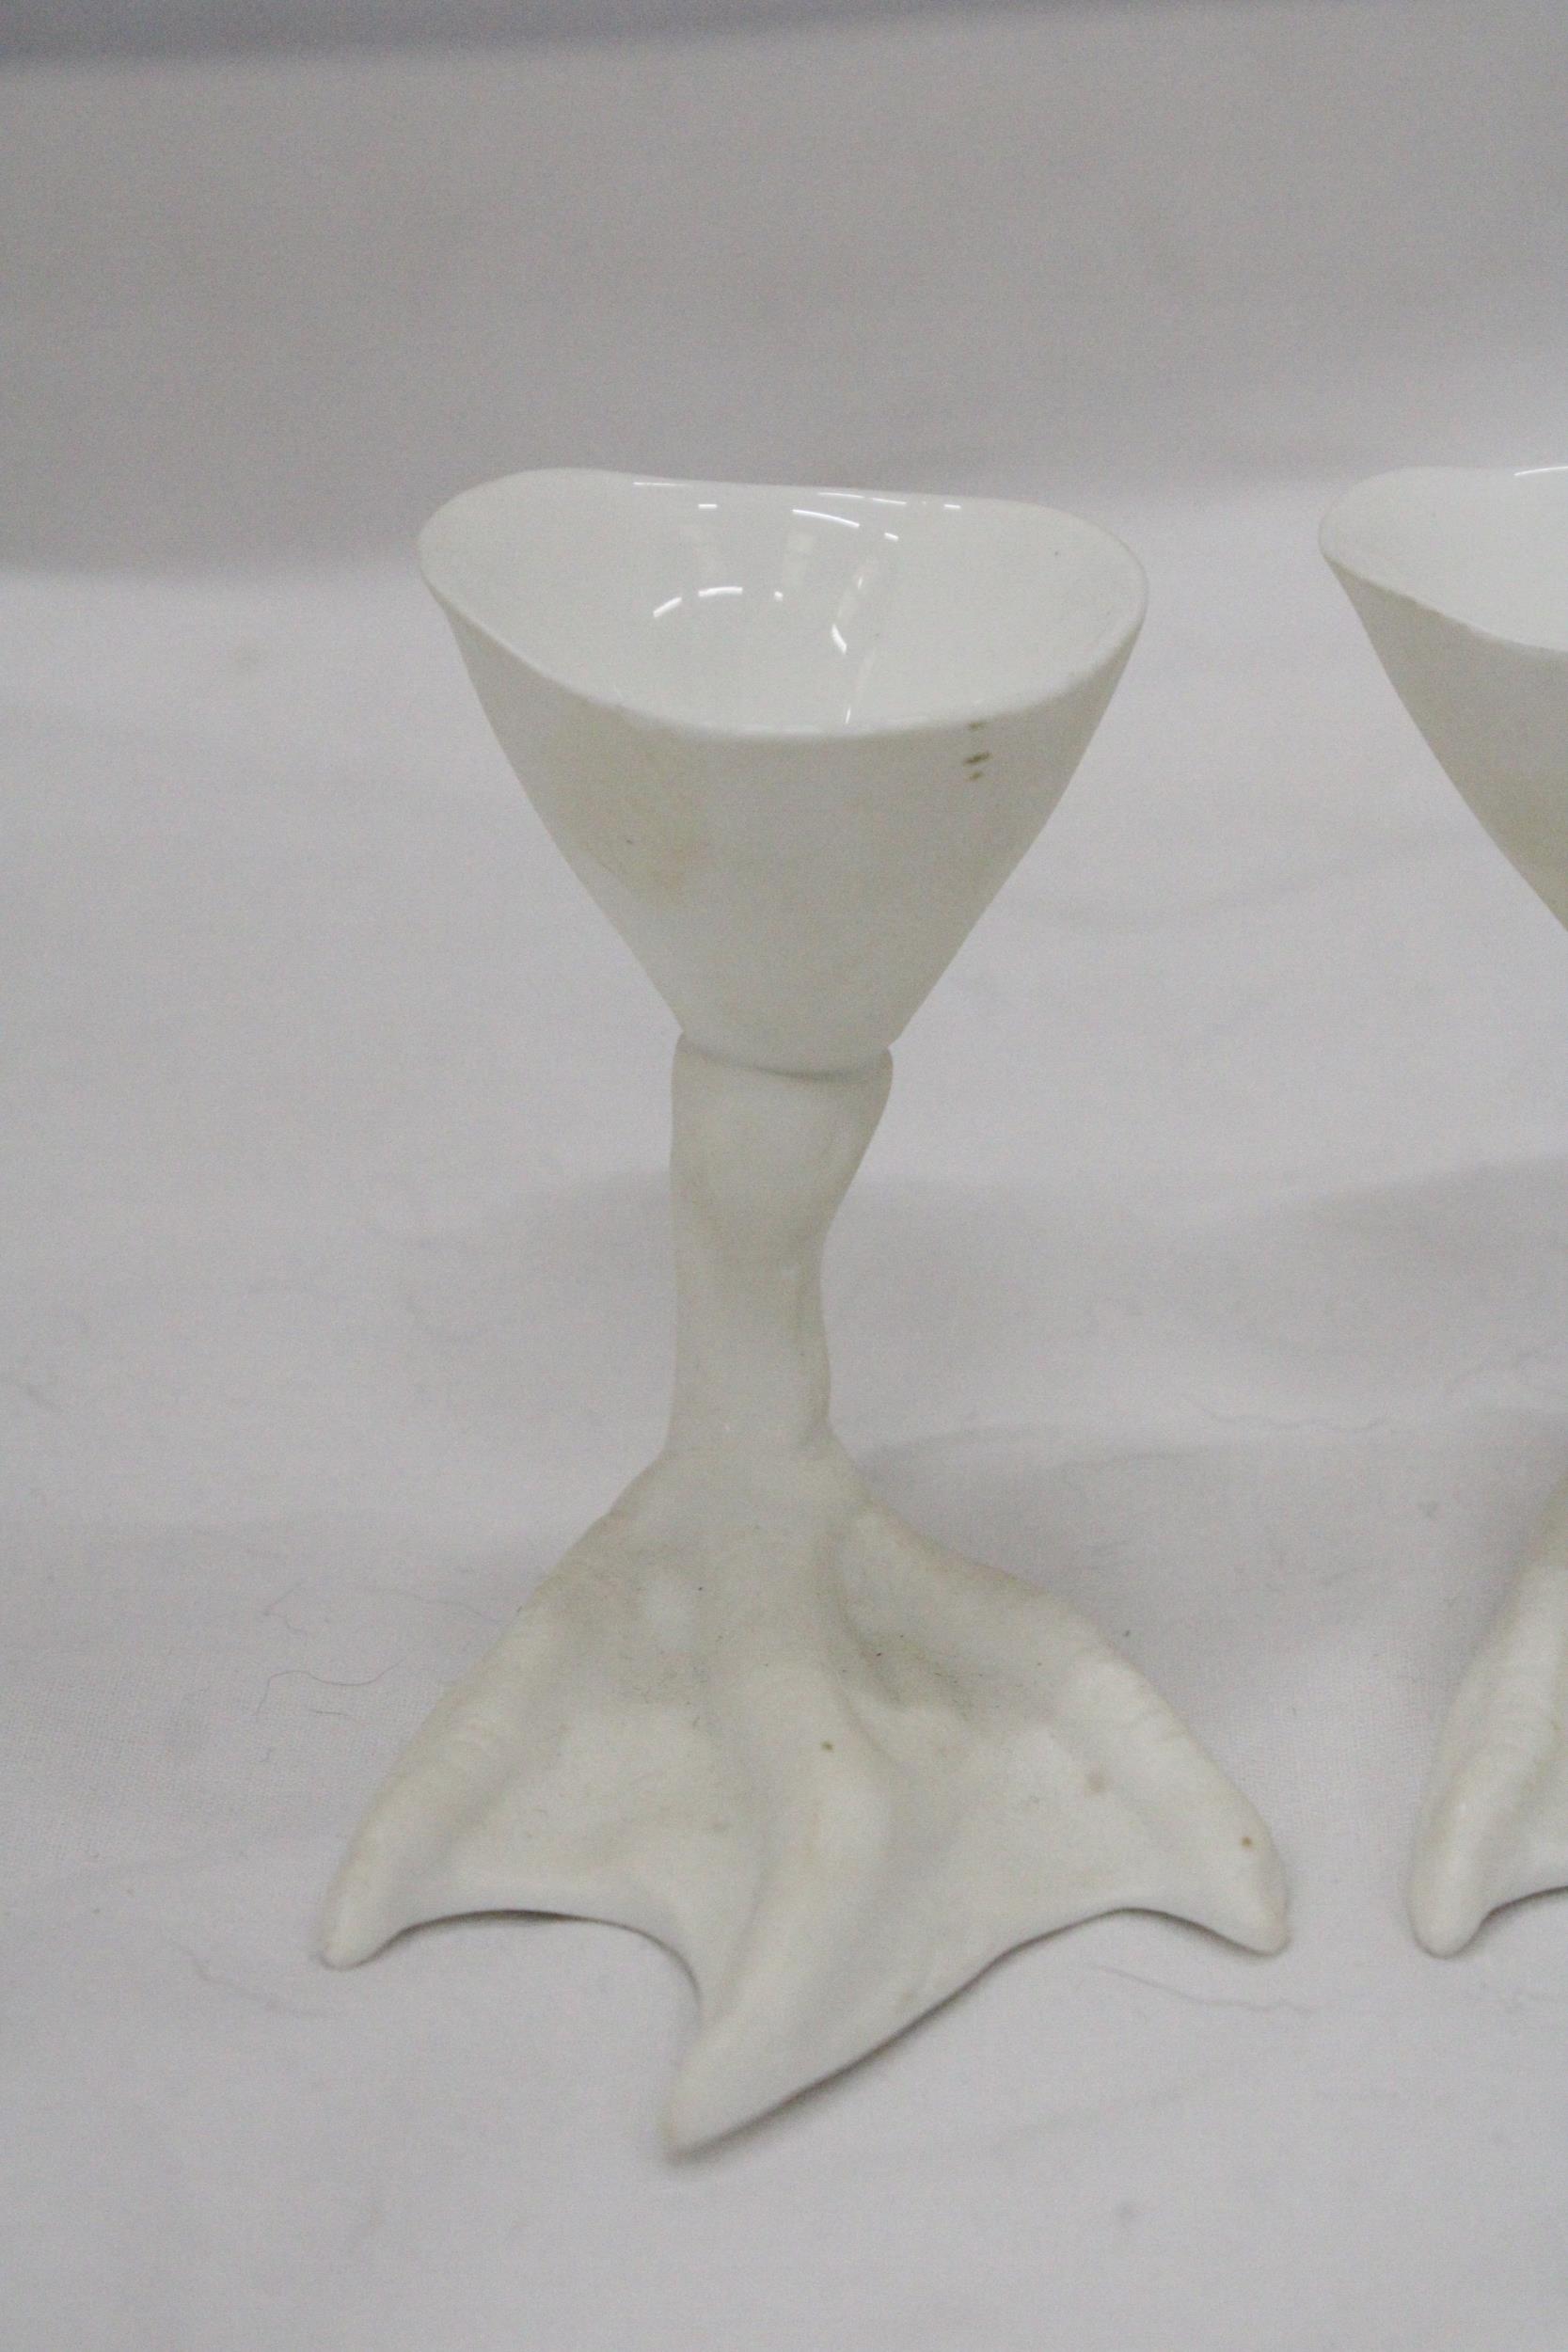 TWO SERAX, PEKING DUCK FOOT EGG CUPS, BOTH IN GOOD CONDITION - Image 5 of 5